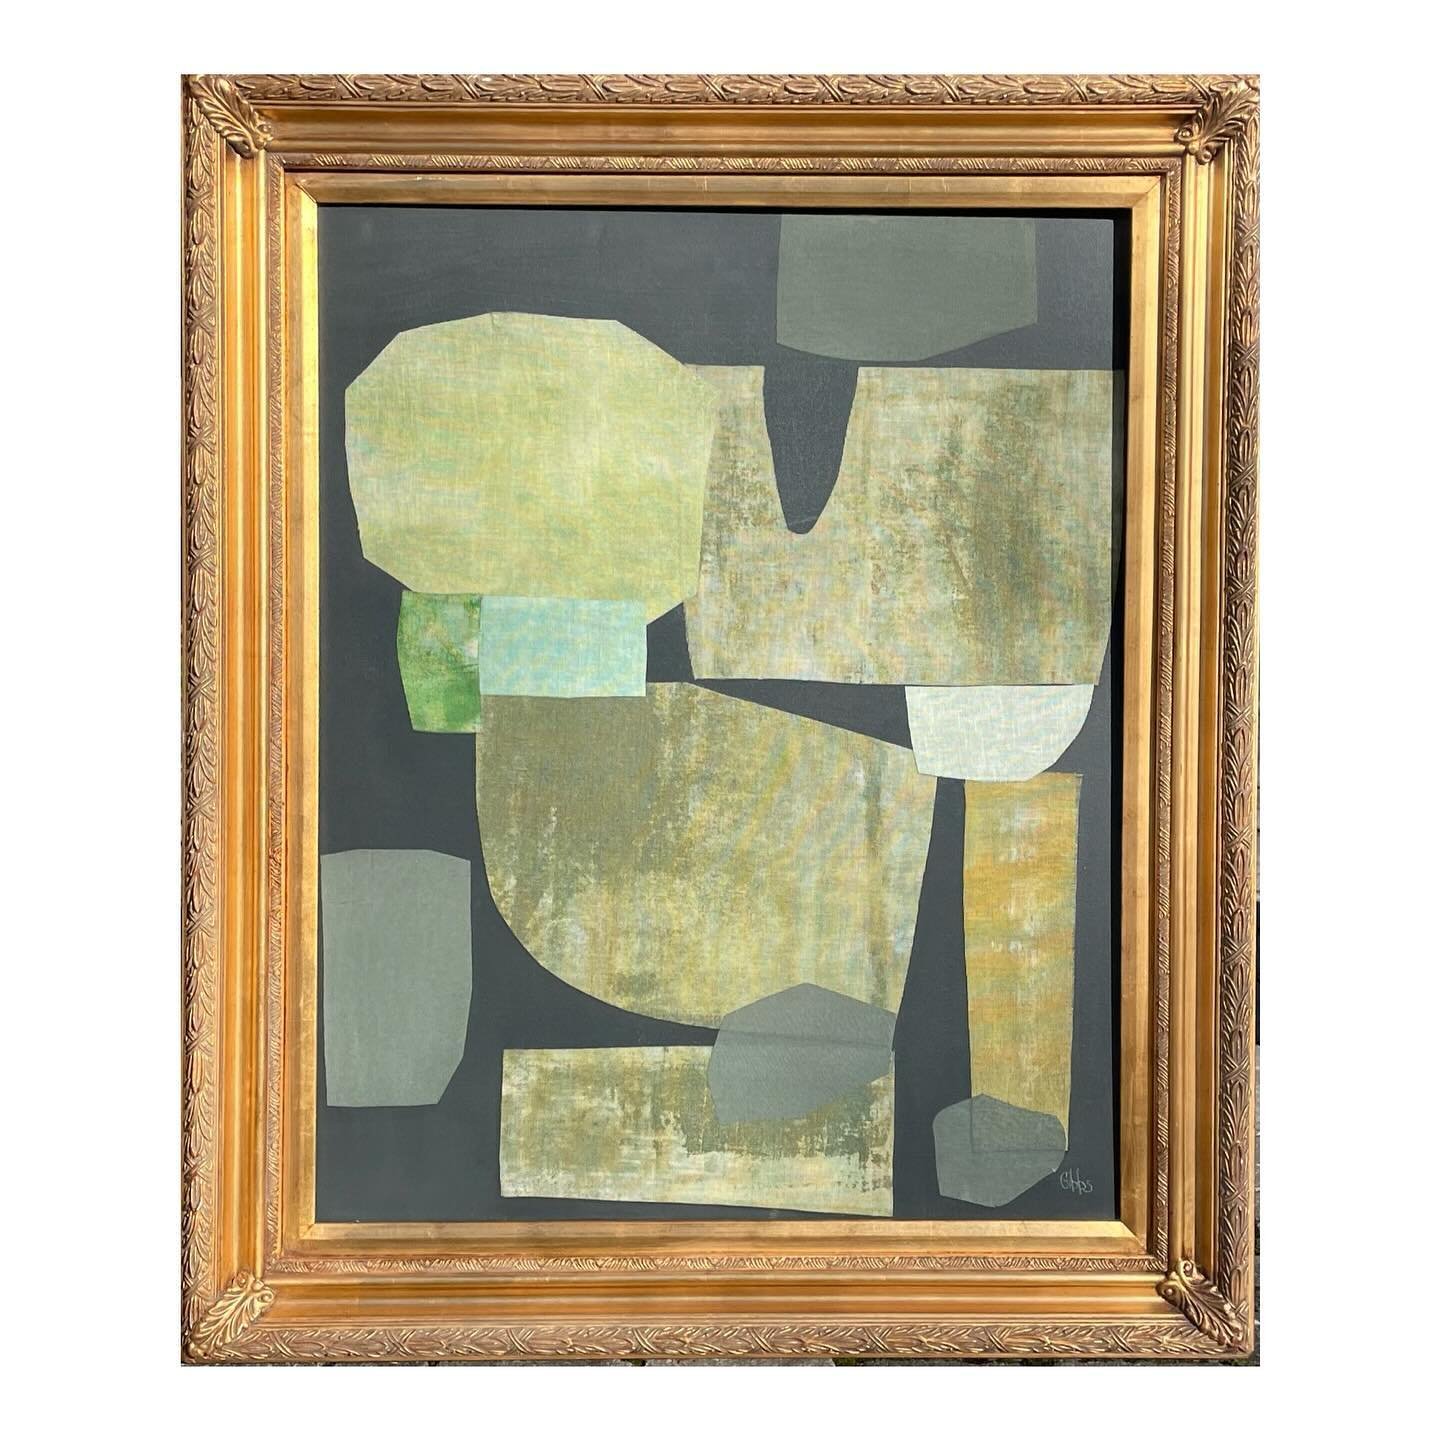 &lsquo;STUDIO GREEN&rsquo;- 34x40 available @designsupplyshop hand dyed linen collage on canvas, framed in vintage 
#jennifergibbsart
#studiogreen 
#collagemyworld